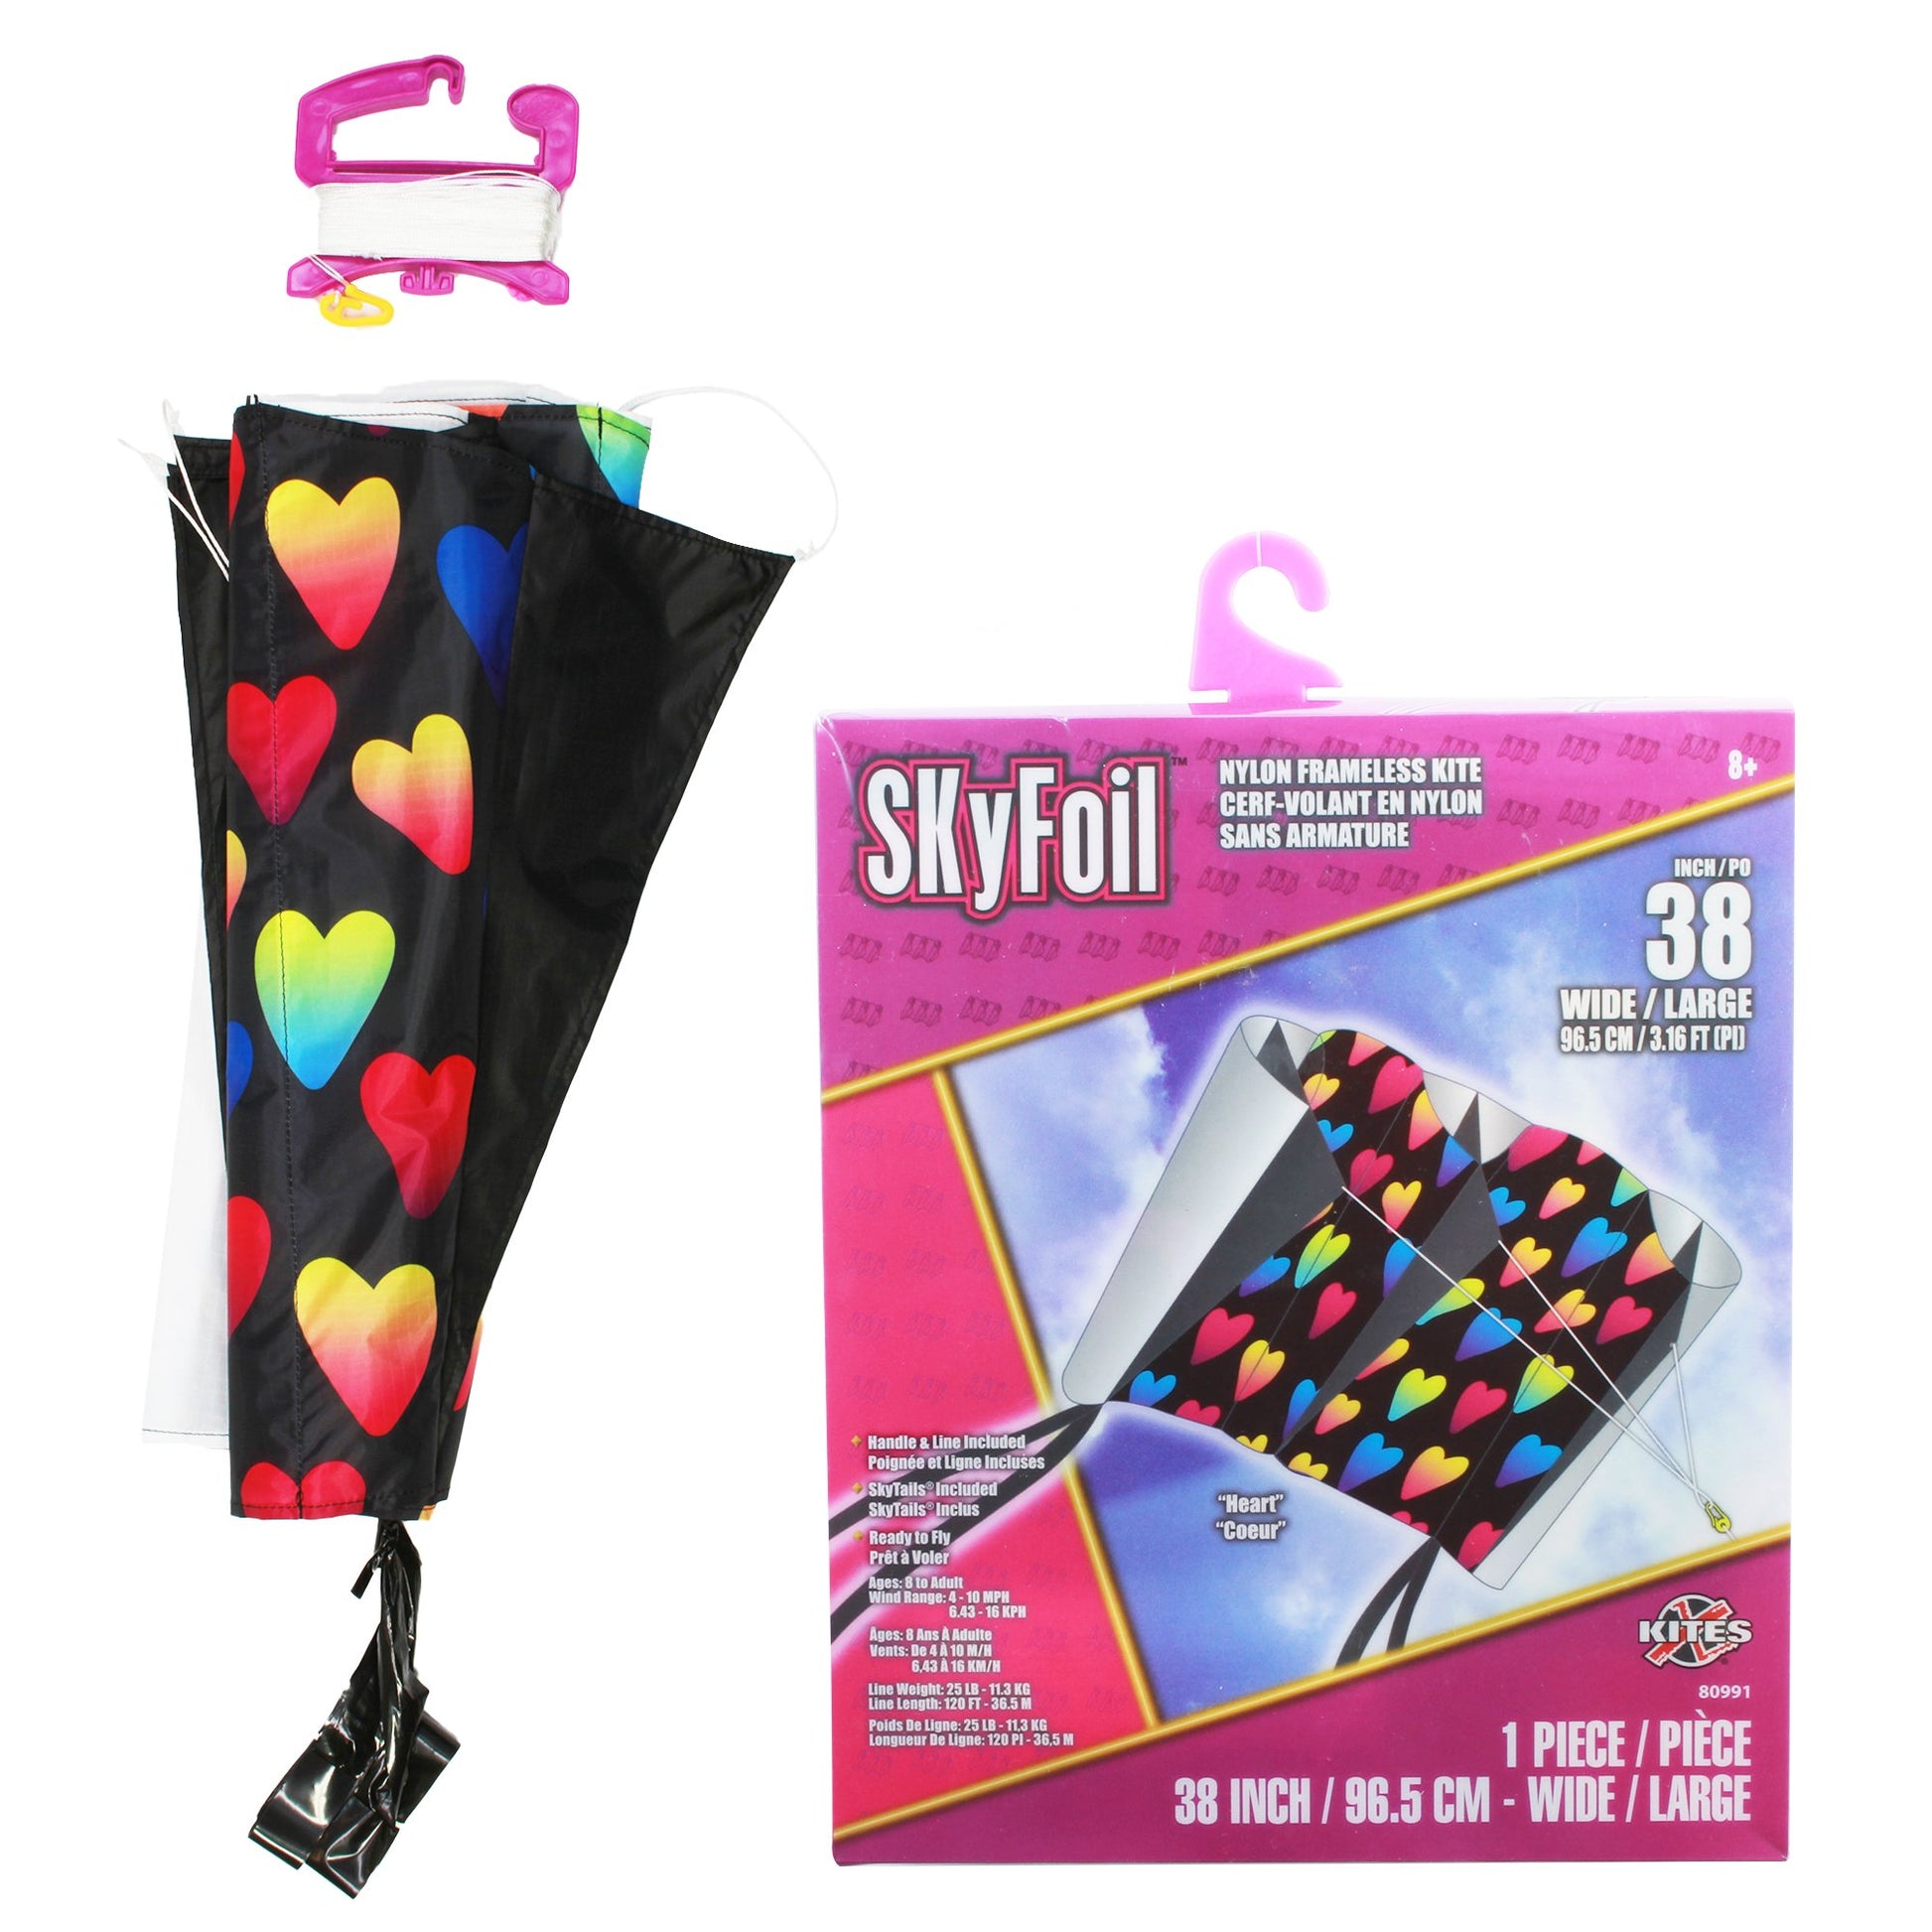 X Kites SkyFoil Hearts Nylon Kite packaging and contents